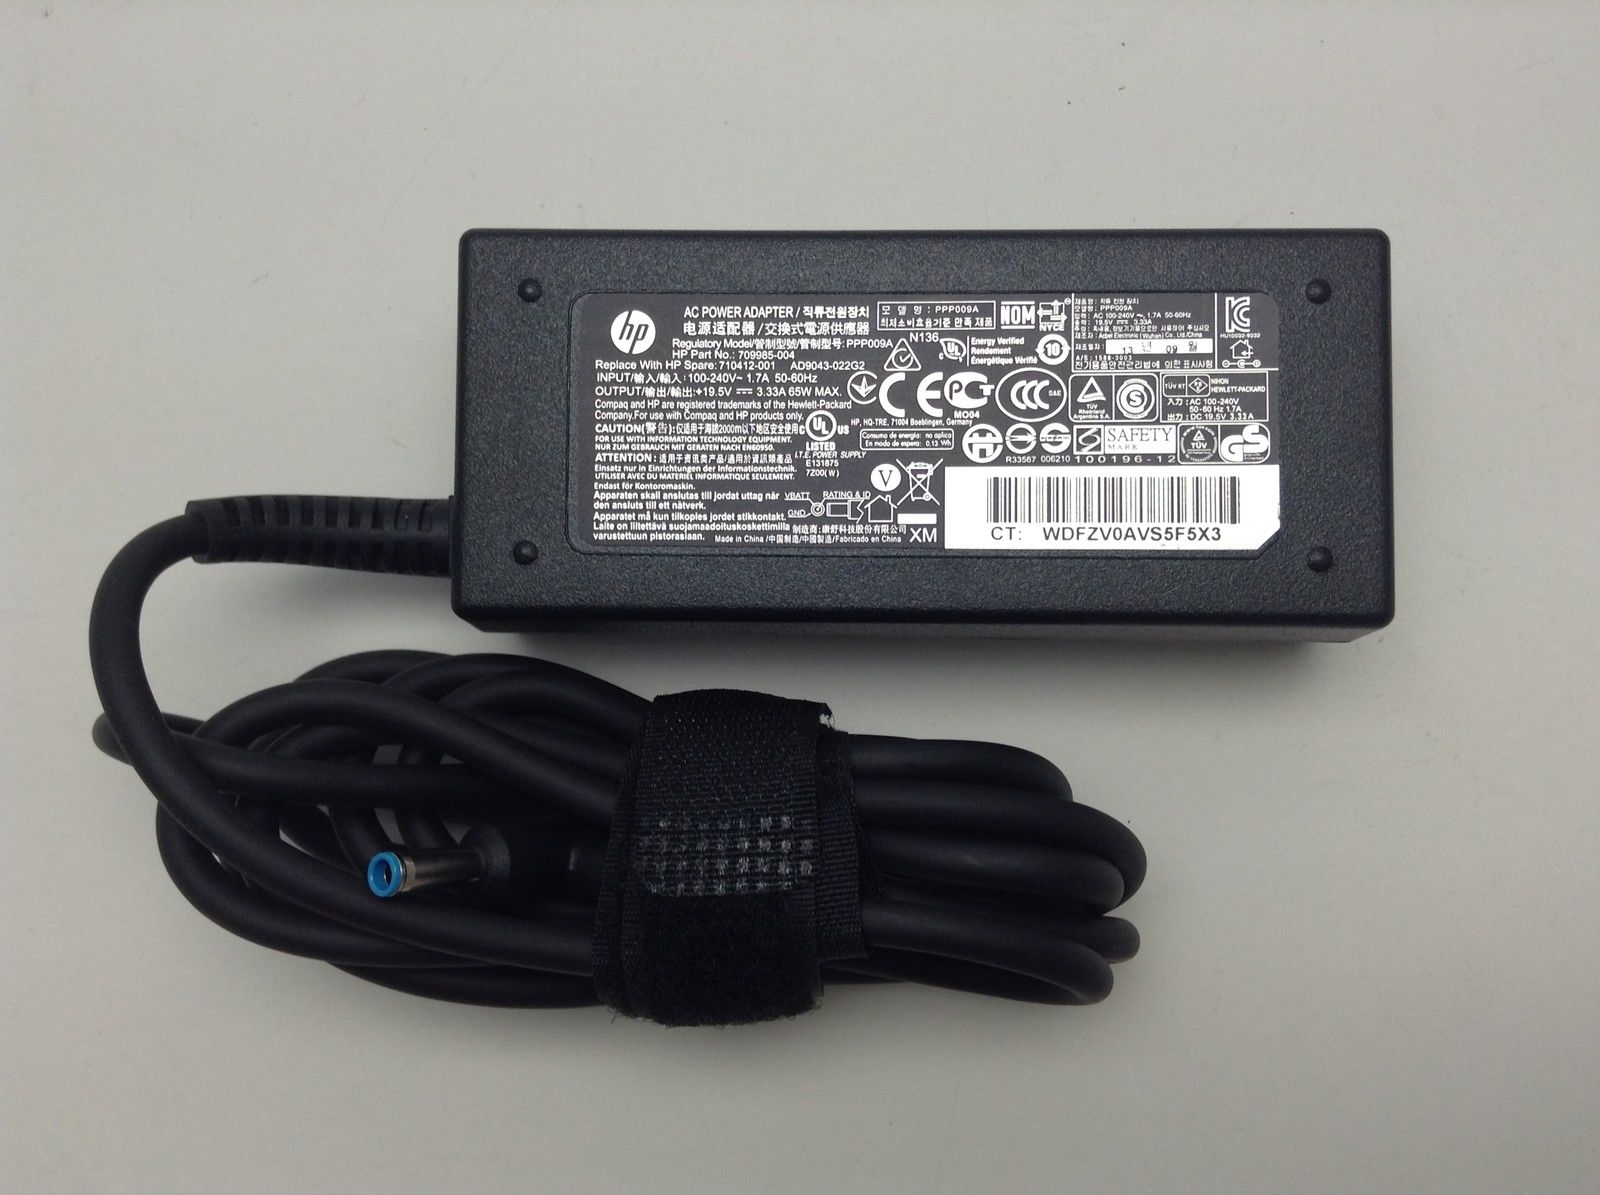 65W AC Adapter Charger For HP 709985-001 709985-003 710412-001 Pavilion 15 Series